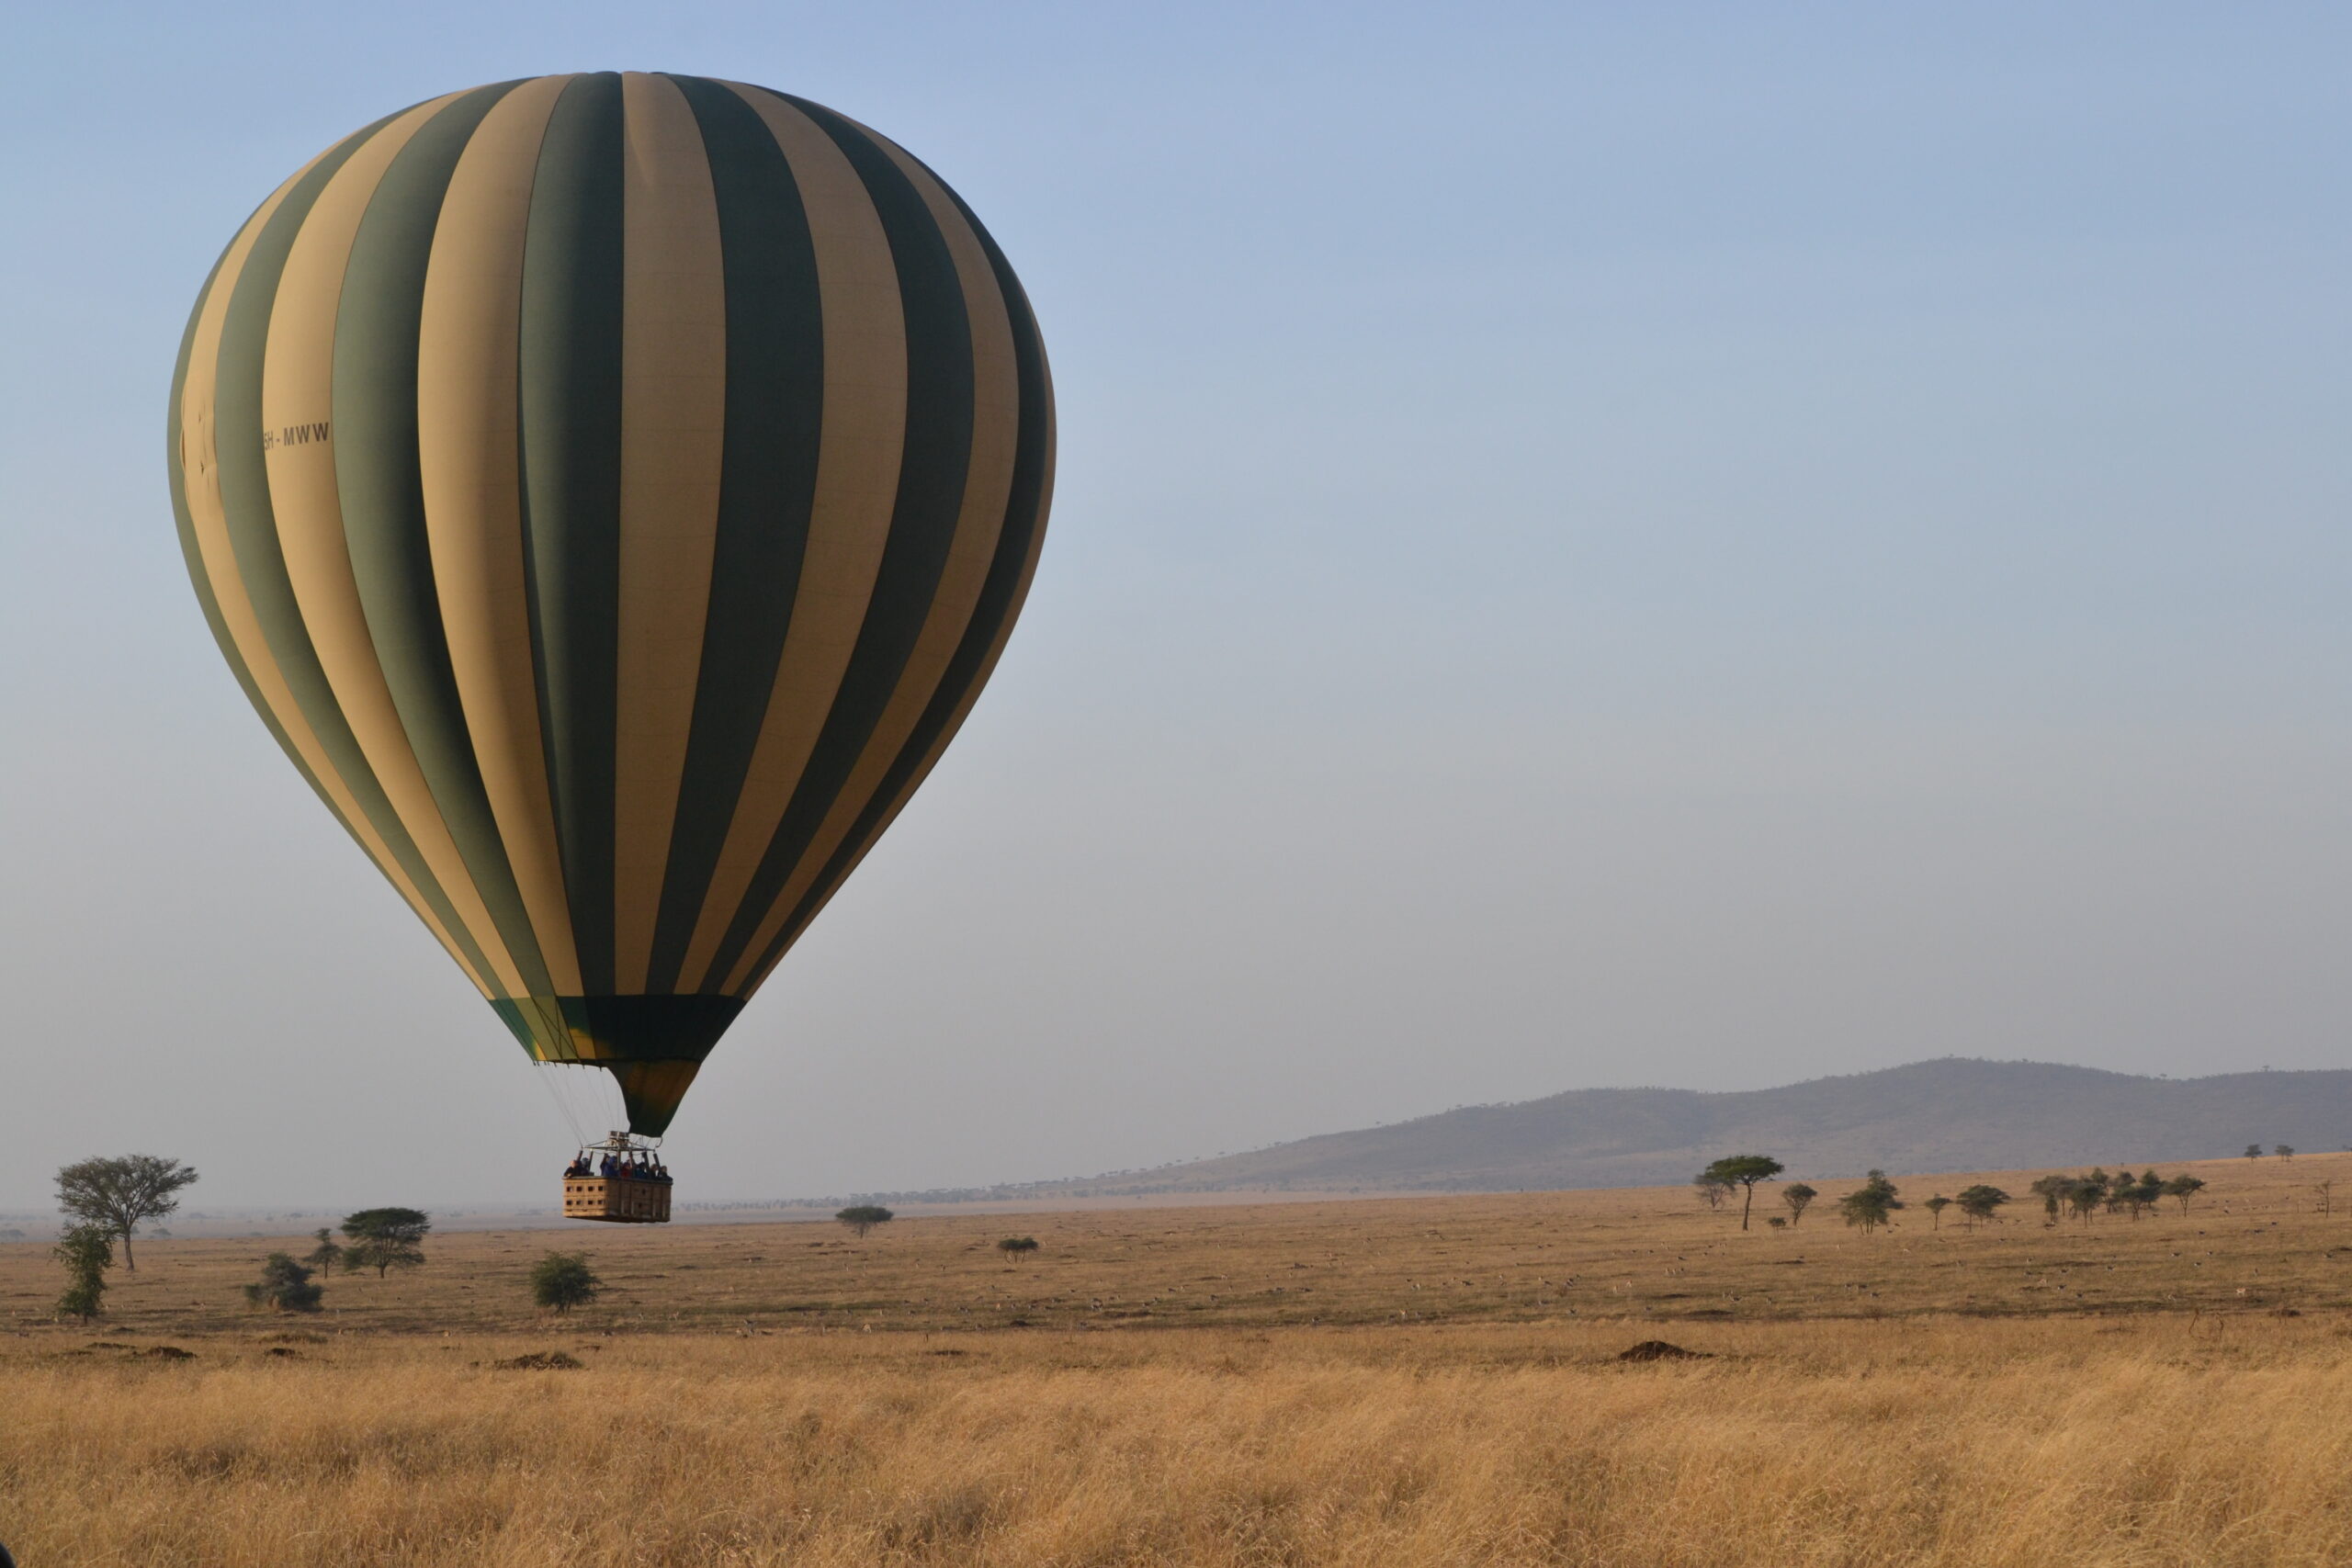  My Unforgettable Hot-Air Ballooning Experience Over the Serengeti